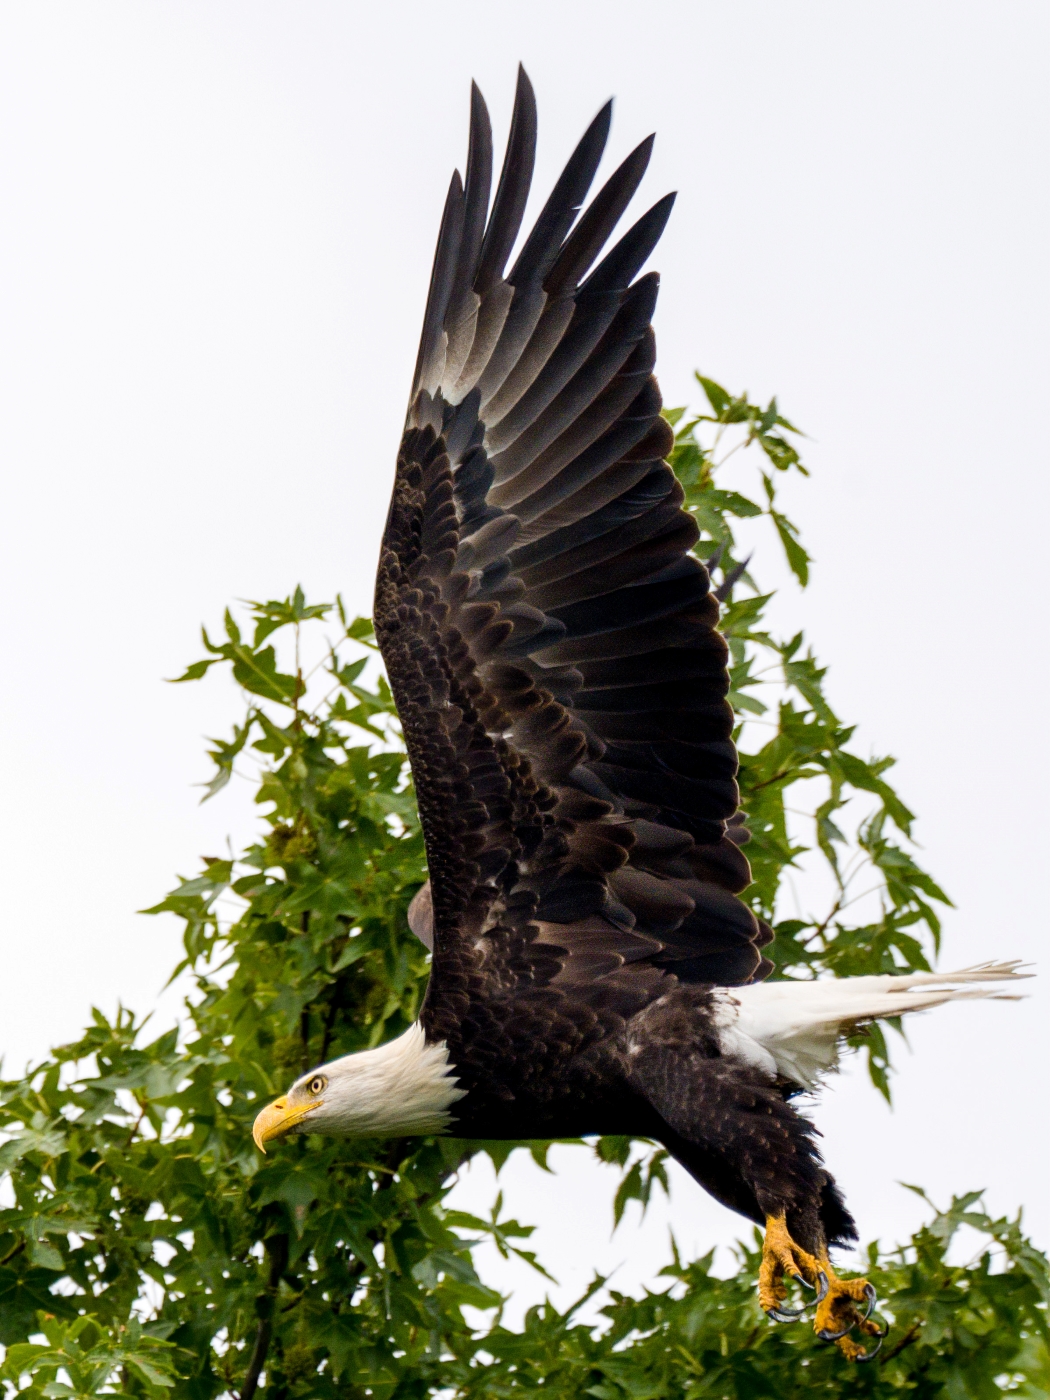 3rd PrizeNature In Class 1 By Stephen Licata For Eagle Launch SEP-2021.jpg